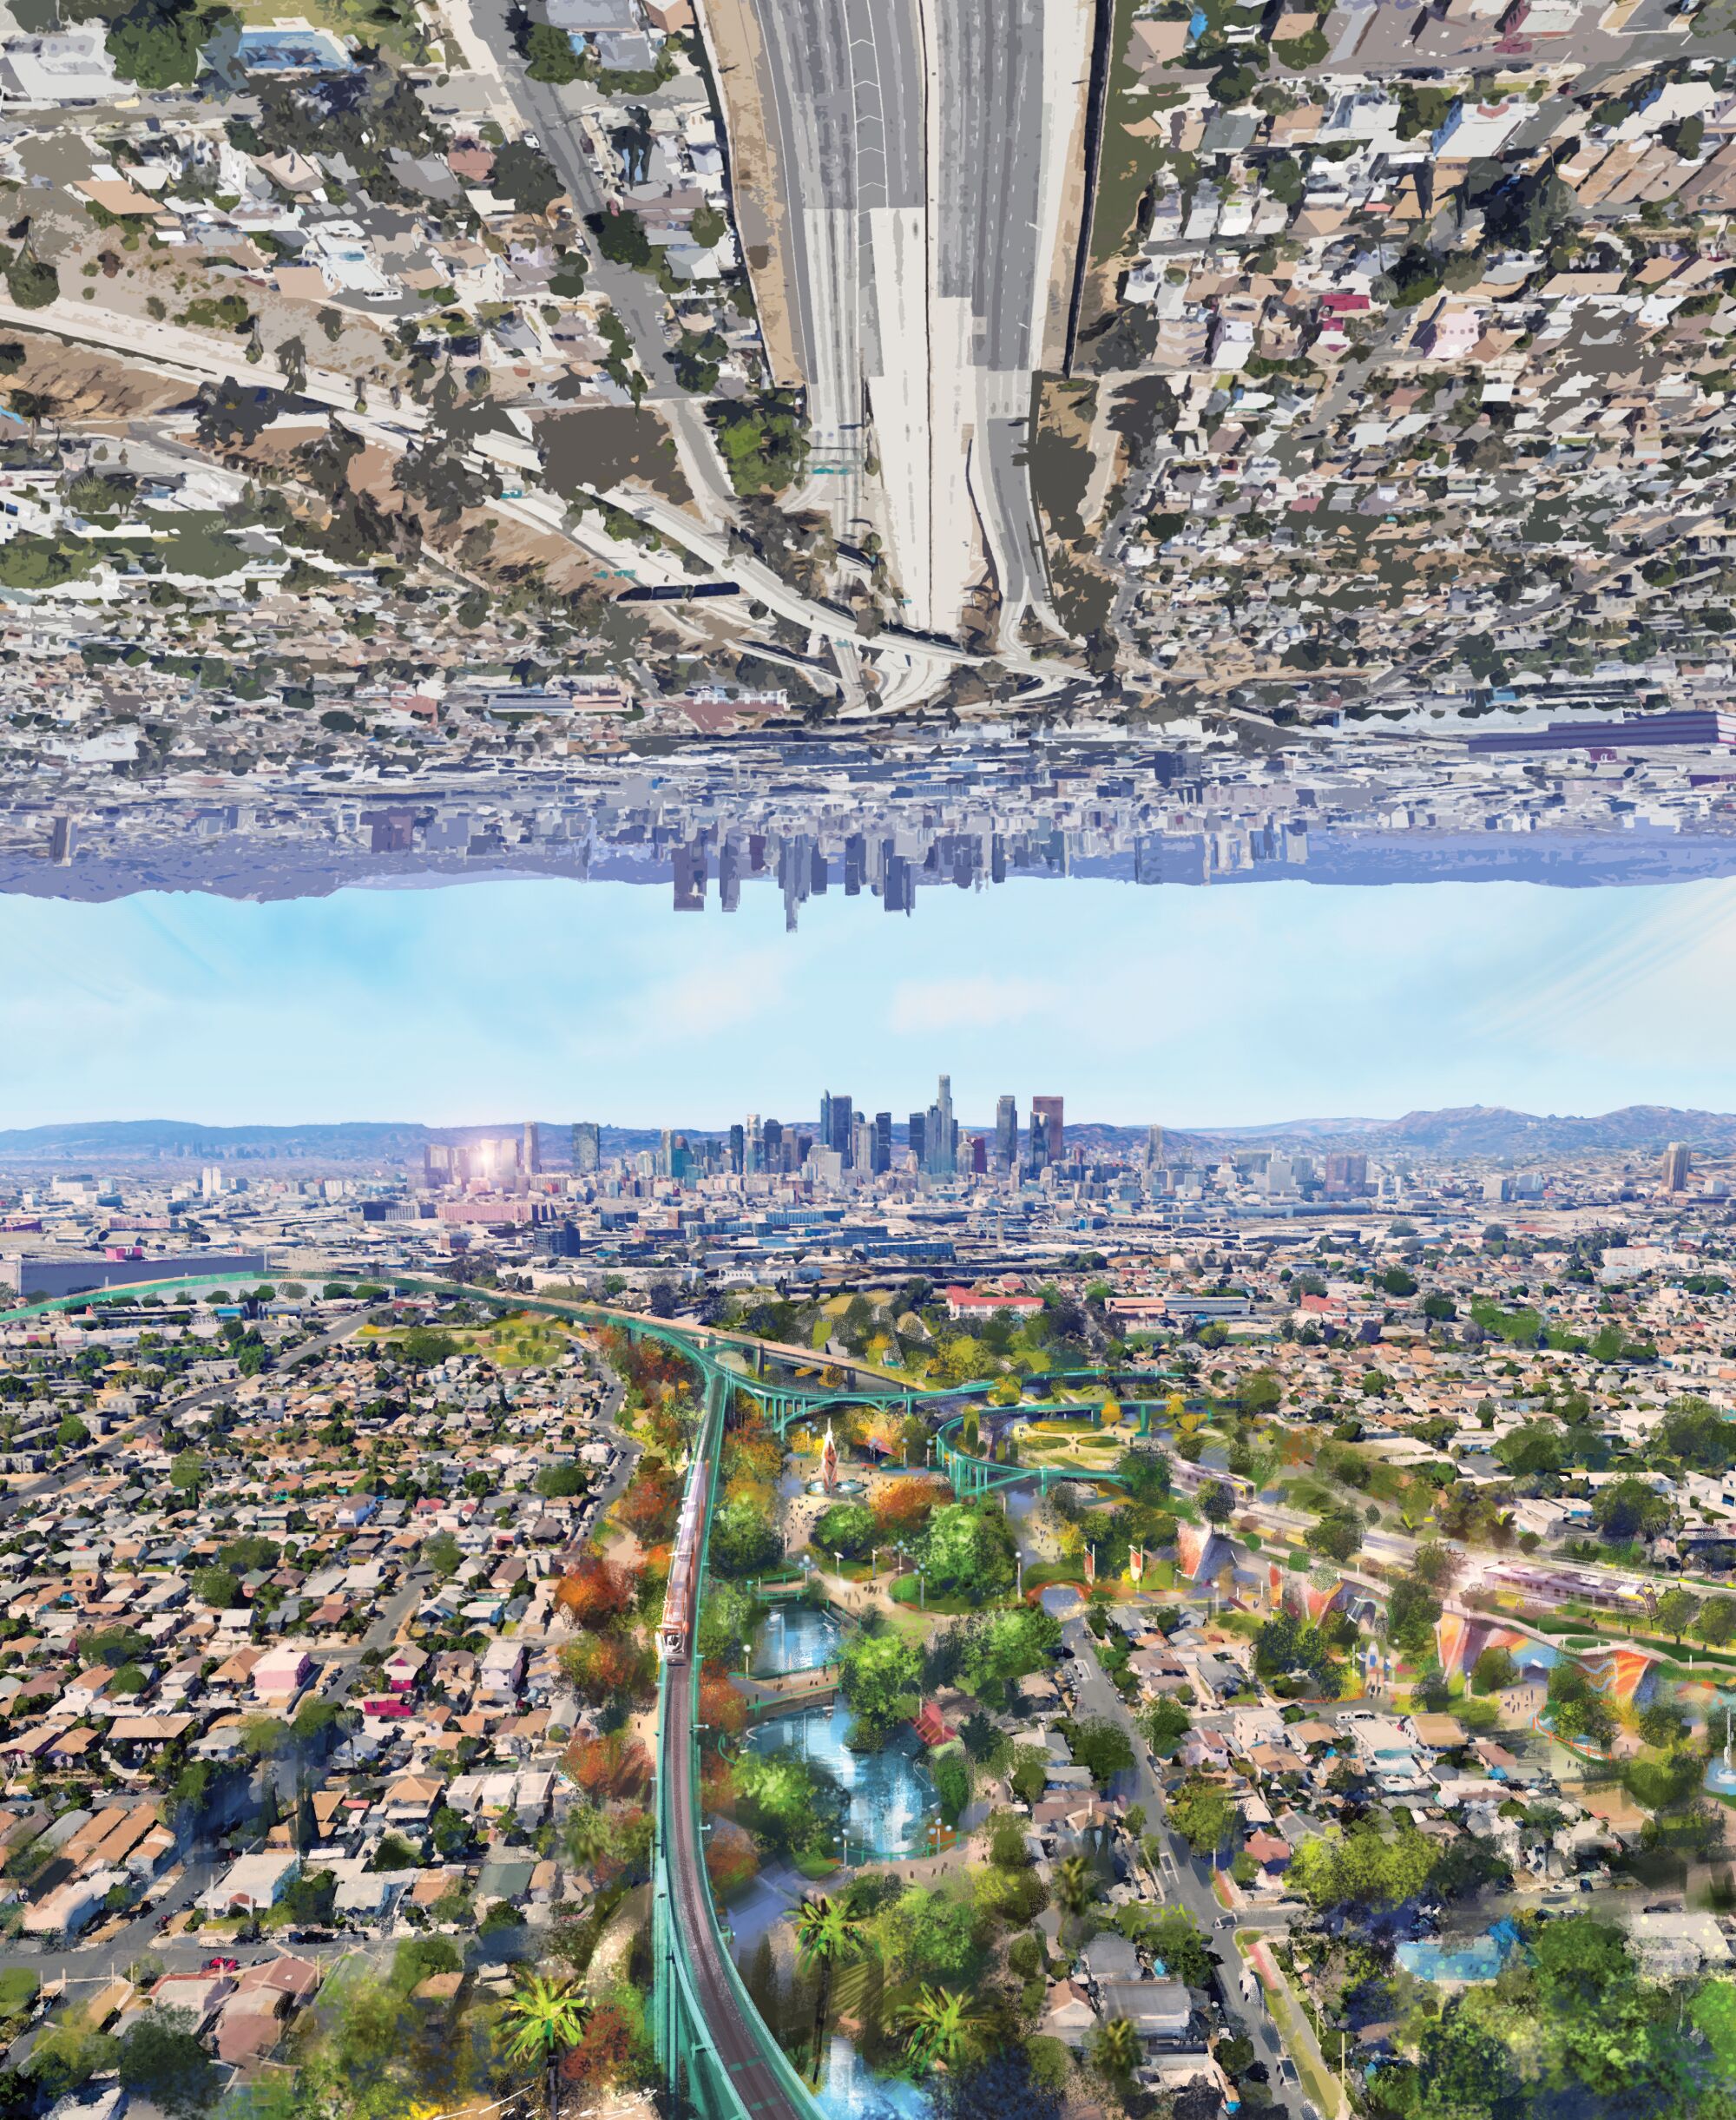 Mirror images of the East L.A. Interchange, the bottom image containing parks and rivers.